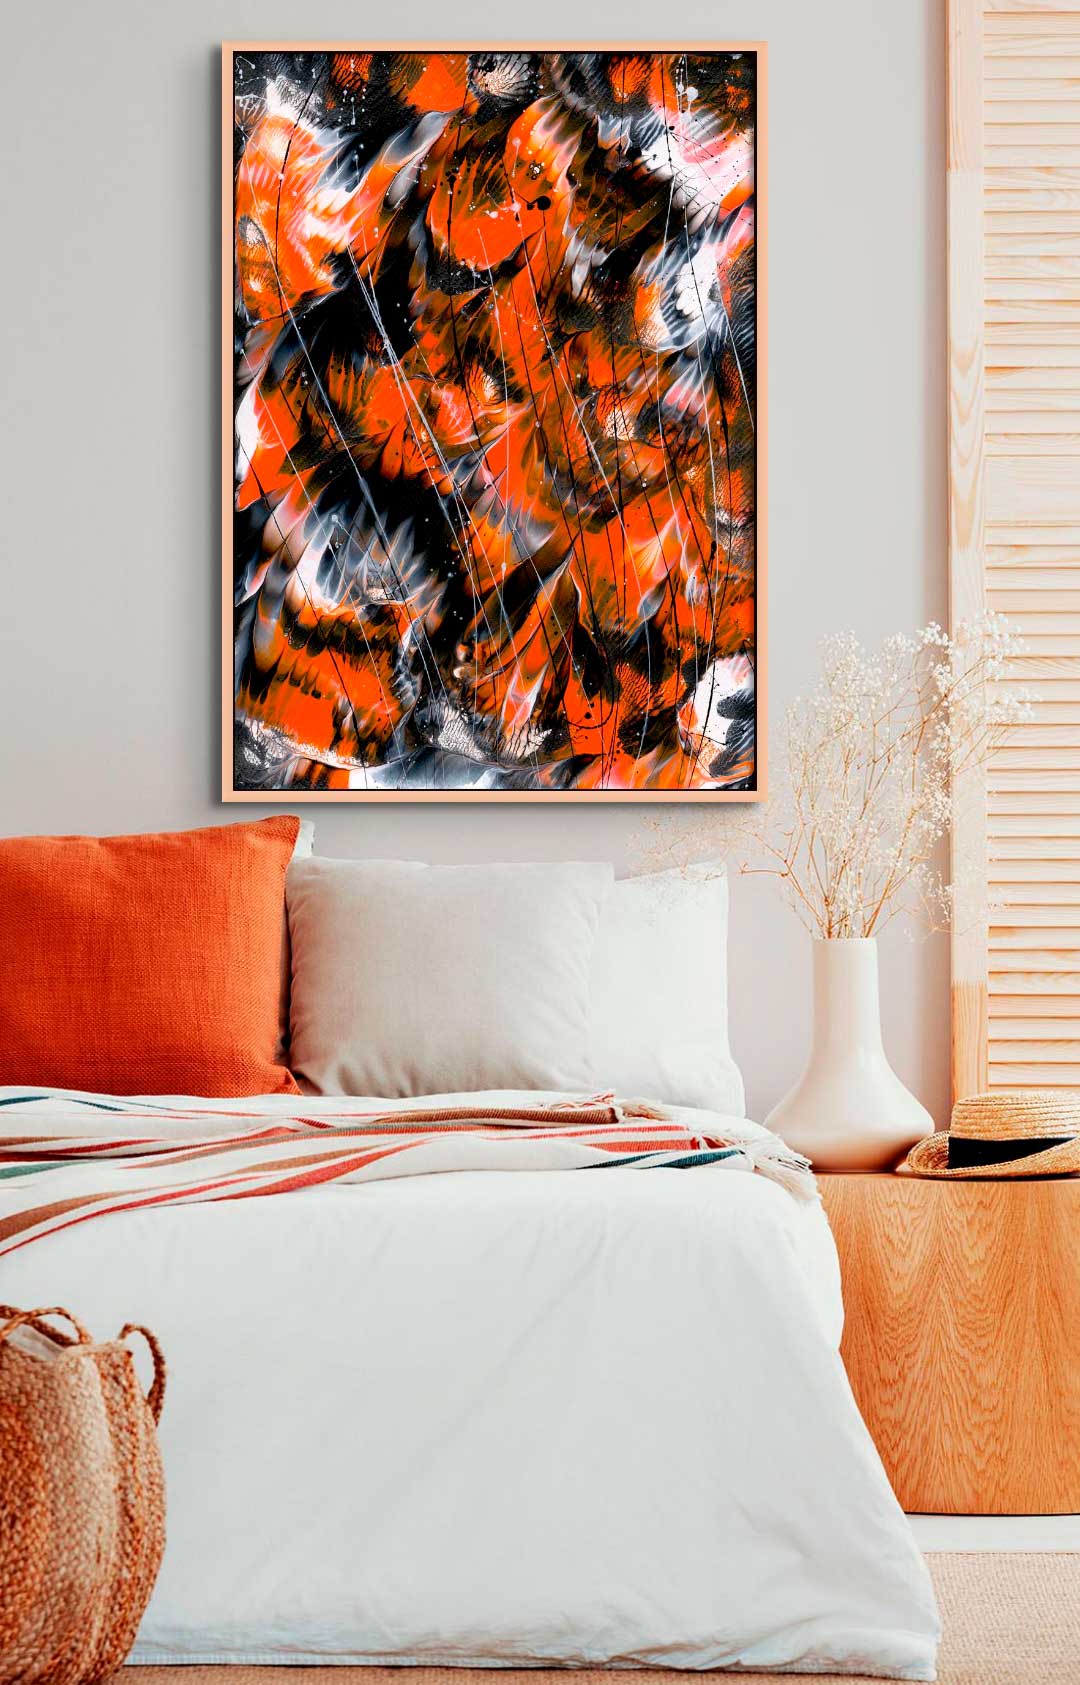 'Monarch 1' Canvas Fine Art Print framed in Solid Oak Timber and hanging Above a Bed. After the original abstarct painting , 'Monarch 1, Butterfly Series' by Bridget Bradley.